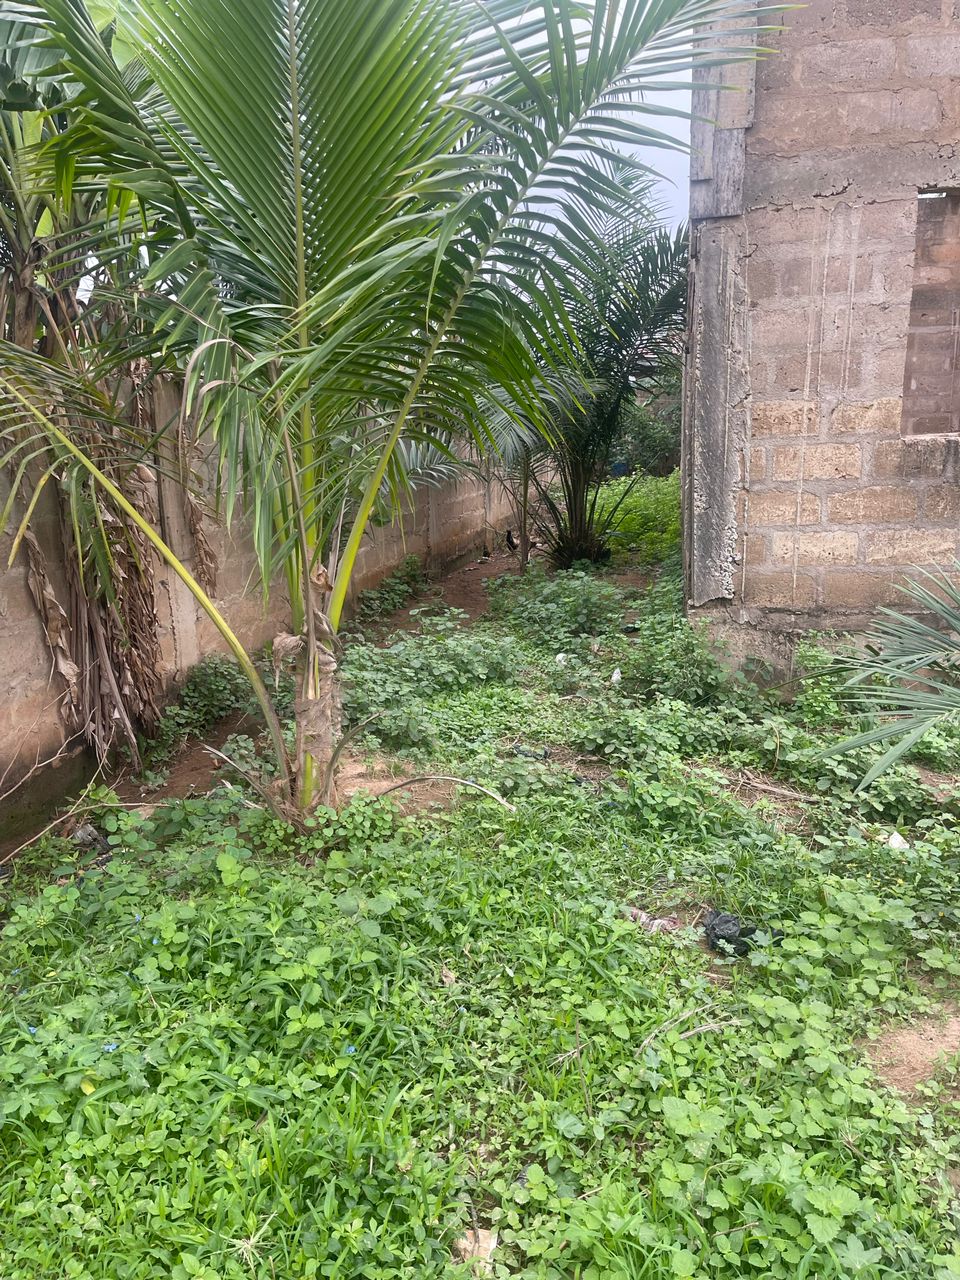 Uncompleted Two (2) Bedroom Semi-detached House With Large Garden for Sale in Abokobi